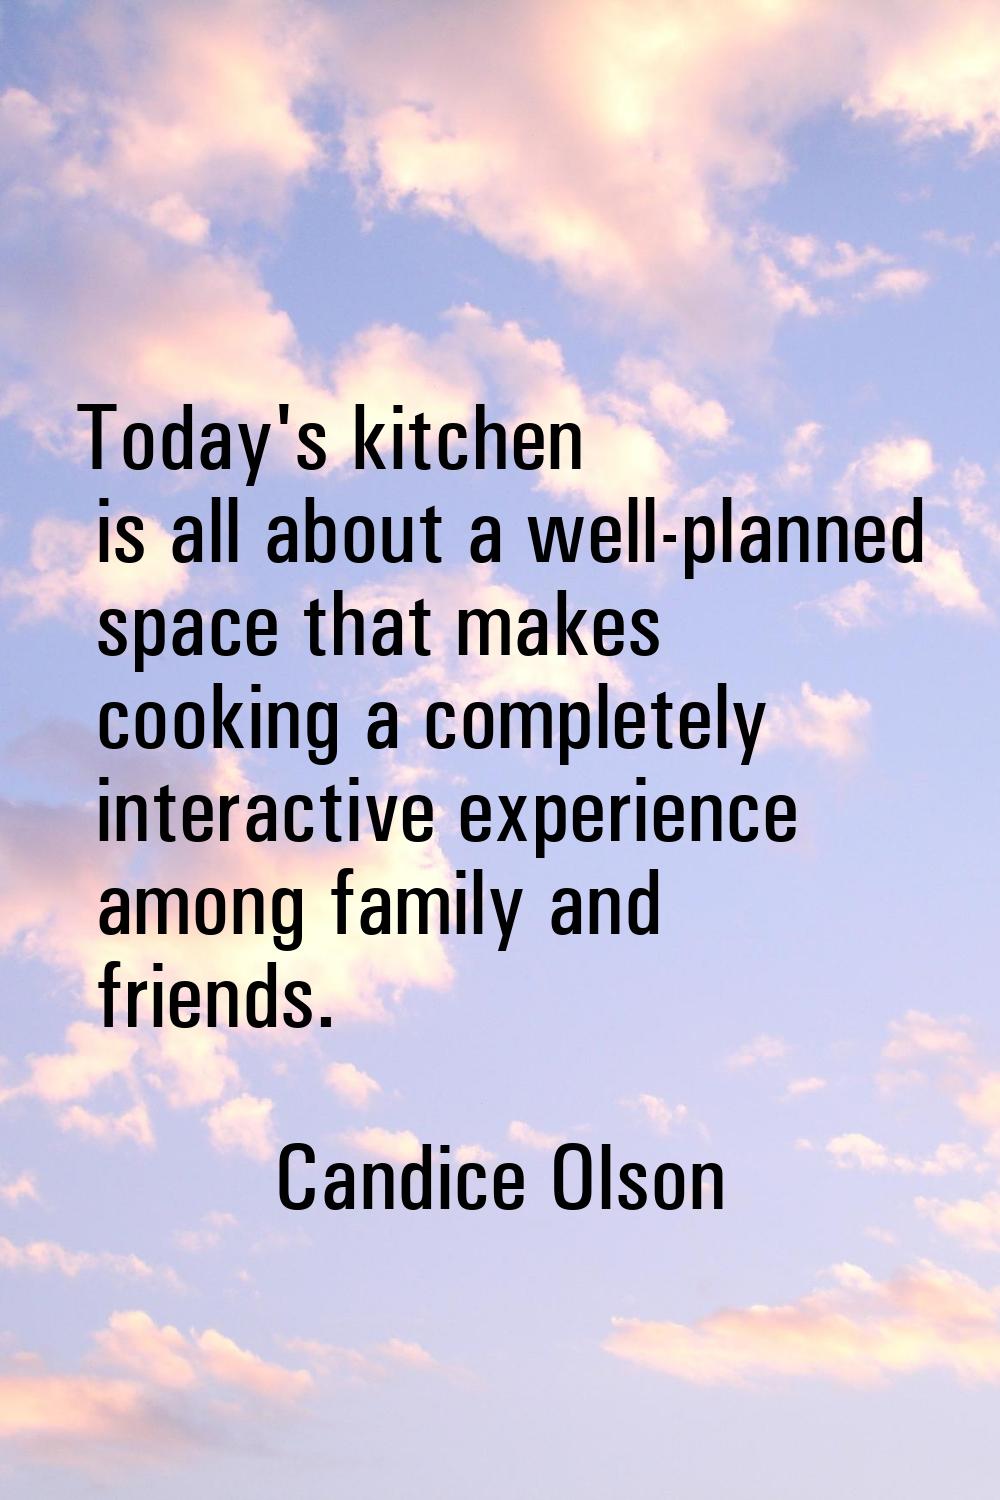 Today's kitchen is all about a well-planned space that makes cooking a completely interactive exper